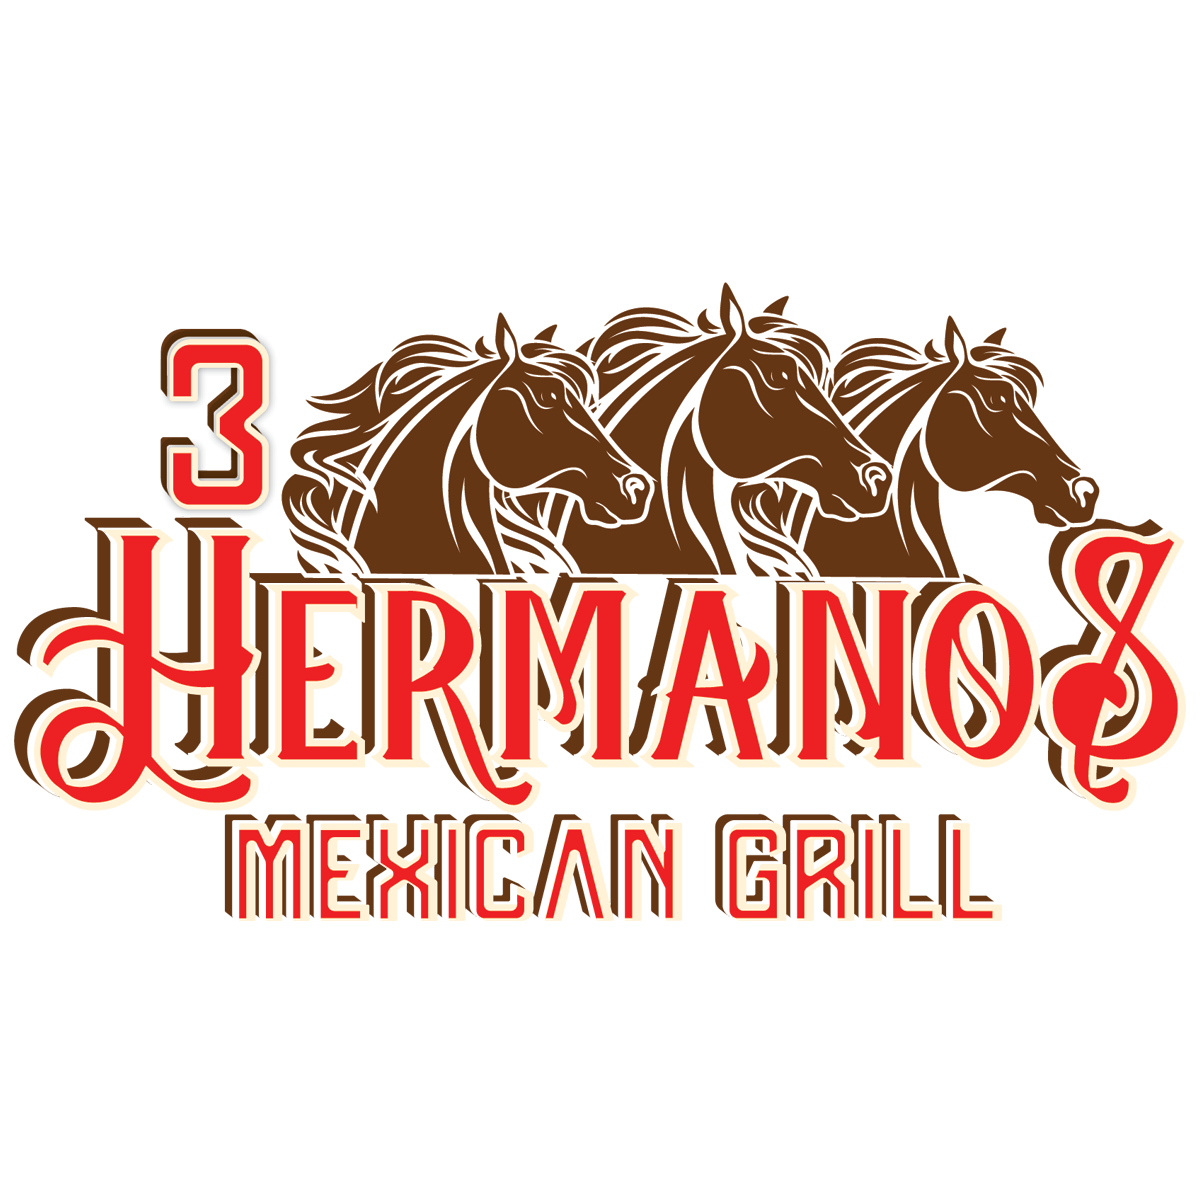 3 Hermanos Mexican Grill 